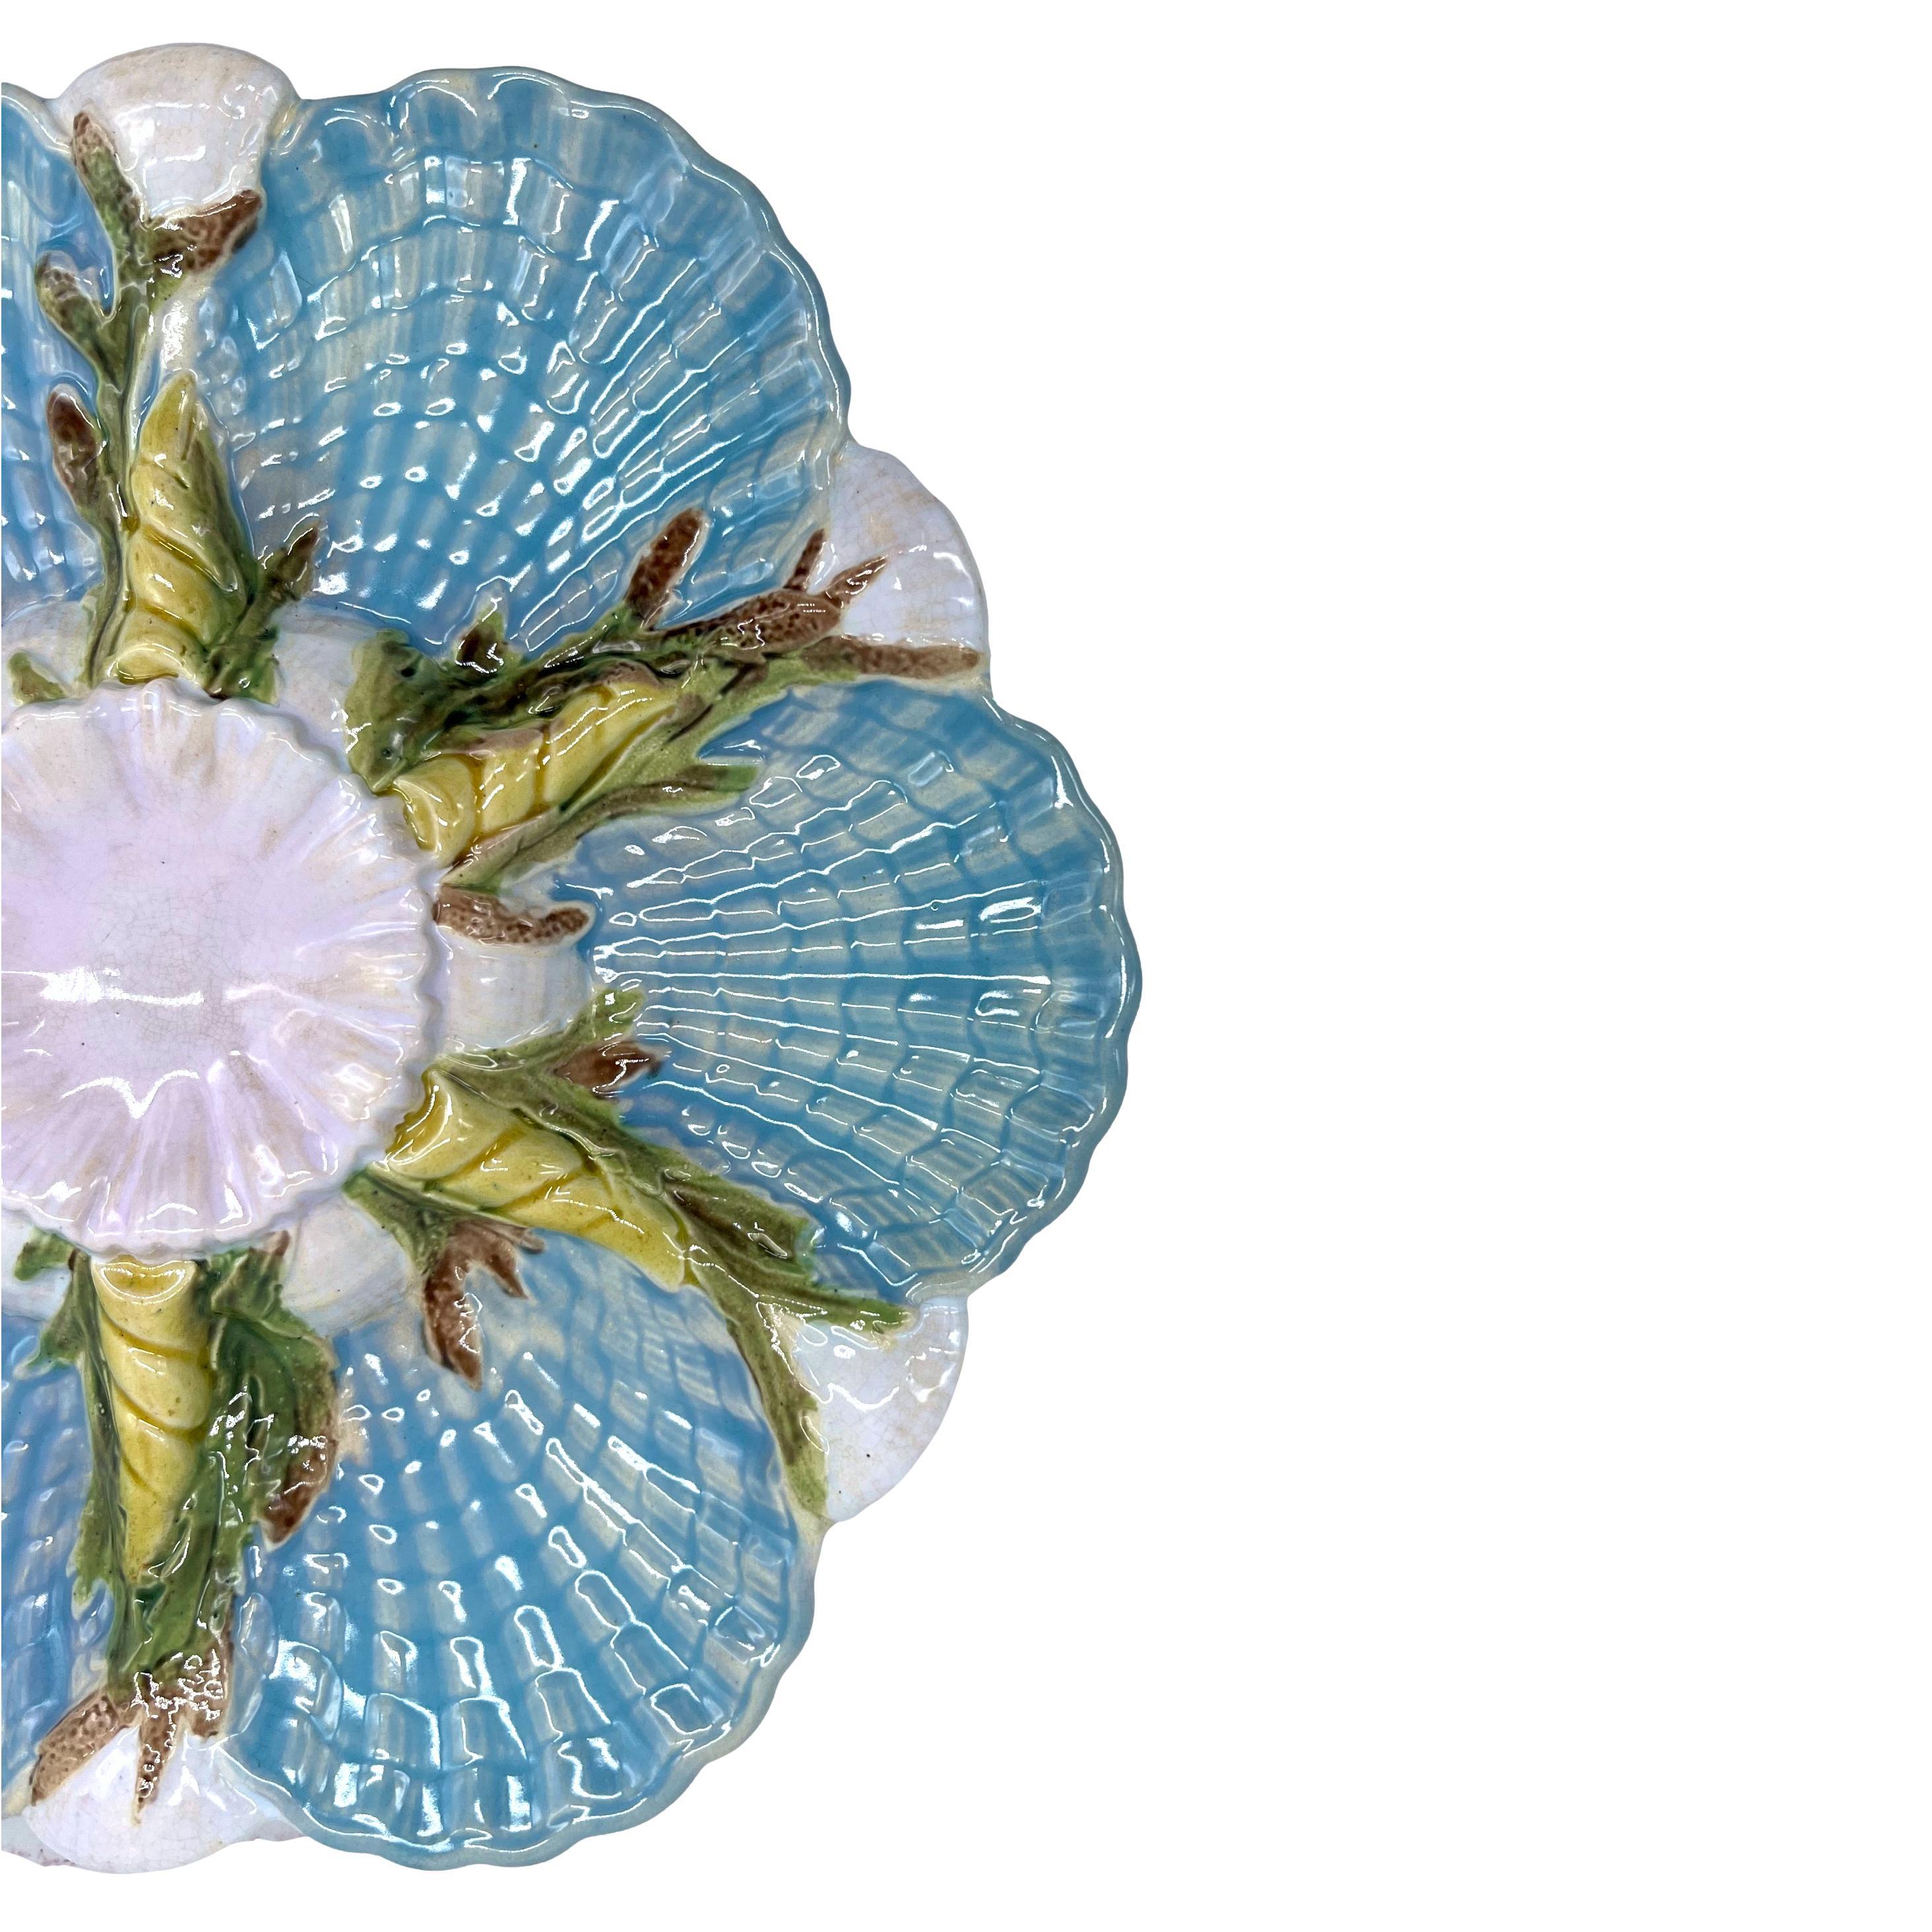 Victorian George Jones Majolica Scalloped Oyster Plate on Turquoise, English, ca. 1875